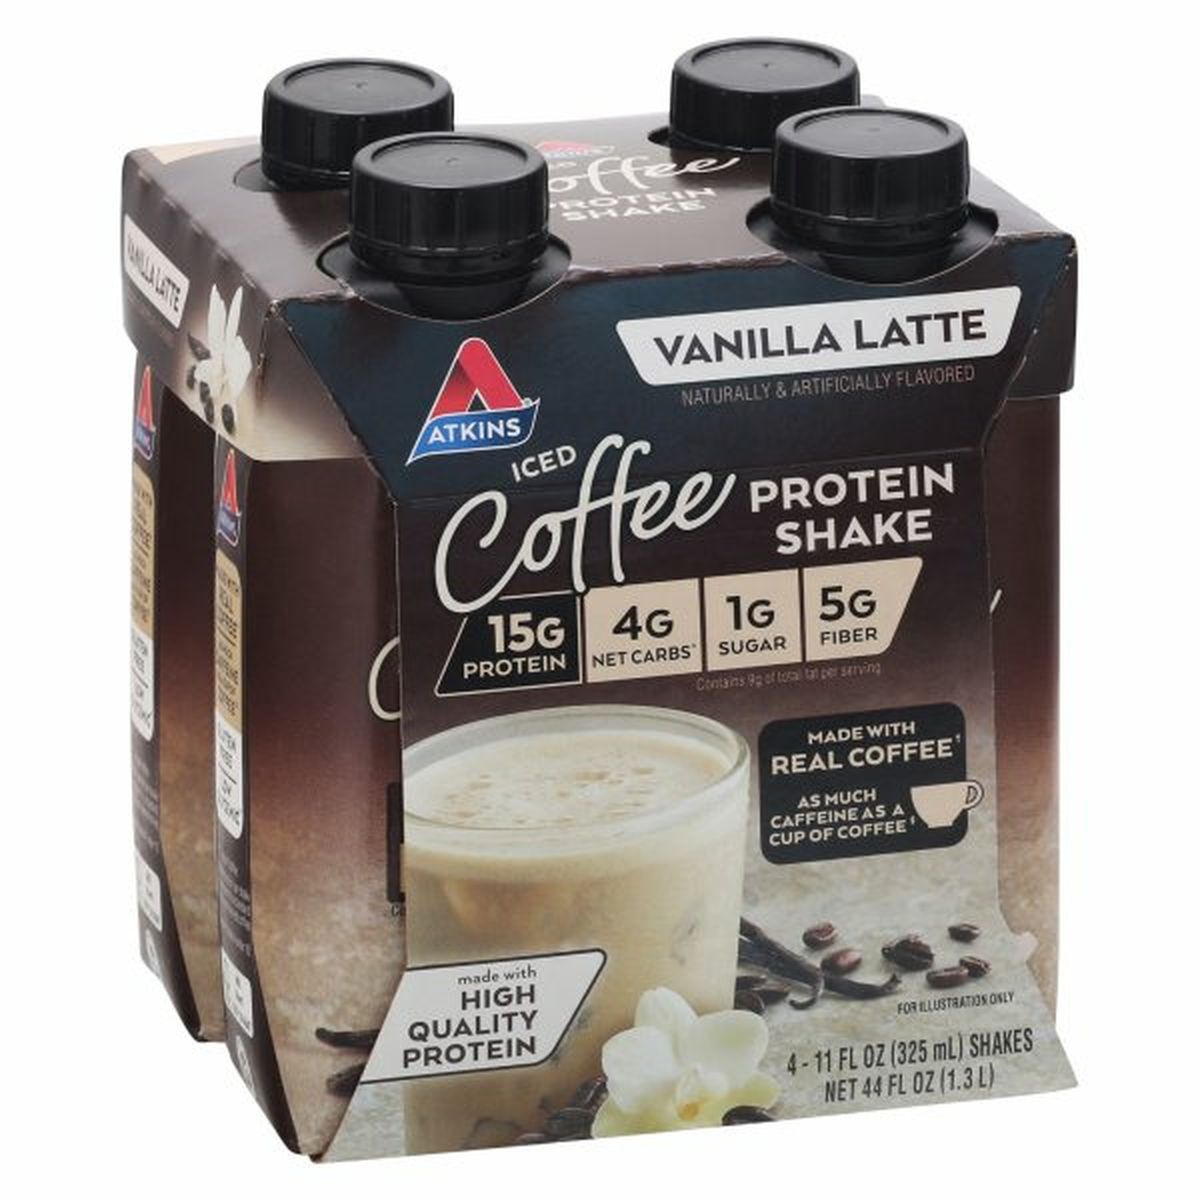 Calories in Atkins Protein Shake, Iced Coffee, Vanilla Latte, 4 Pack